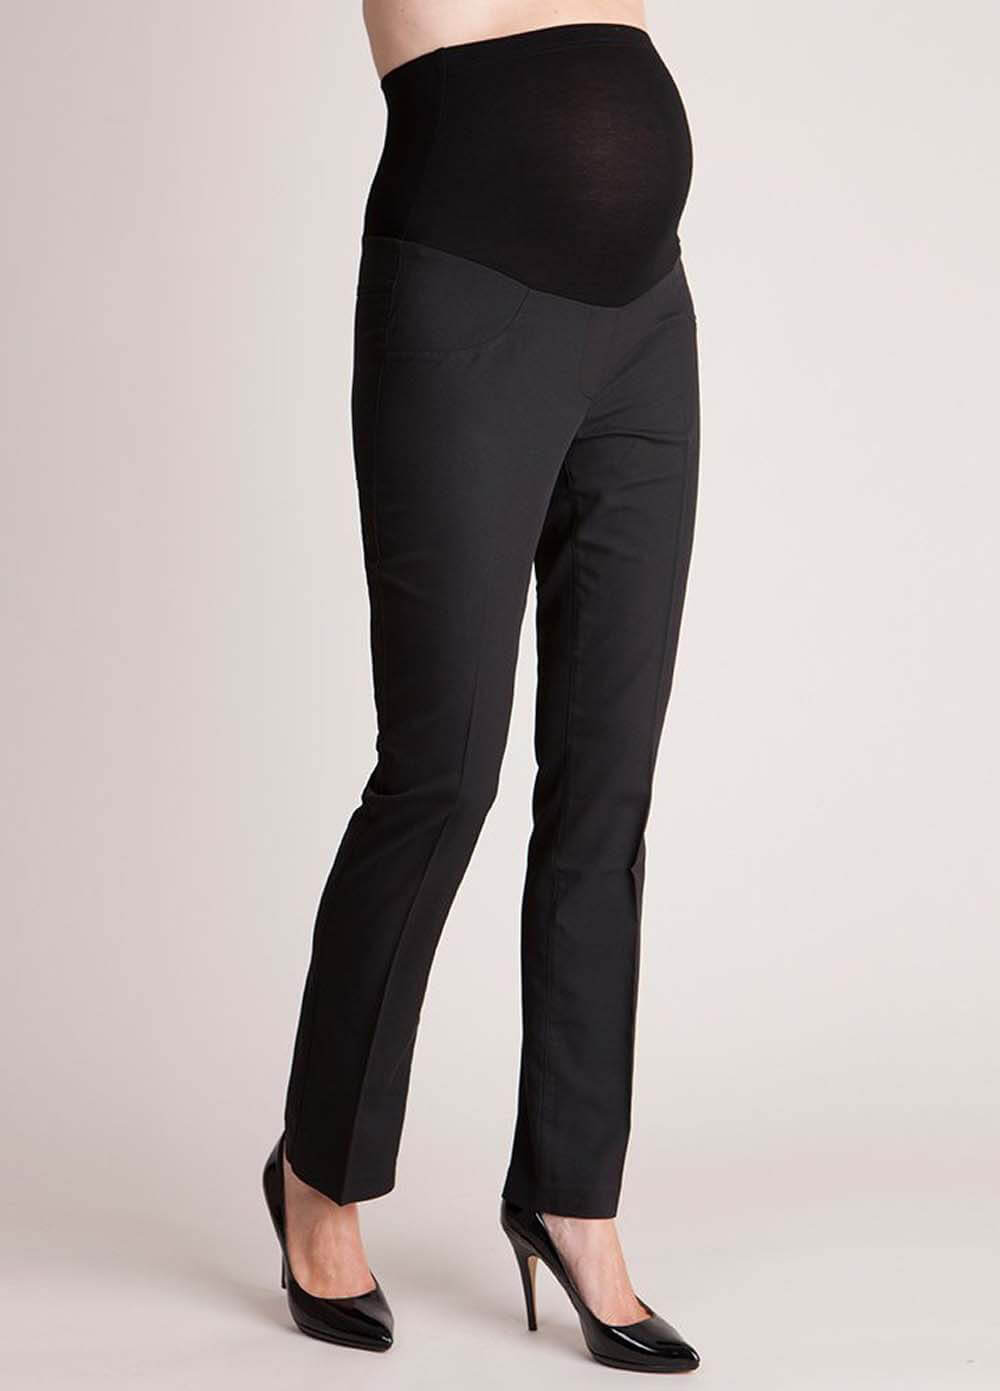 Sofia Black Straight Leg Maternity Trousers by Seraphine